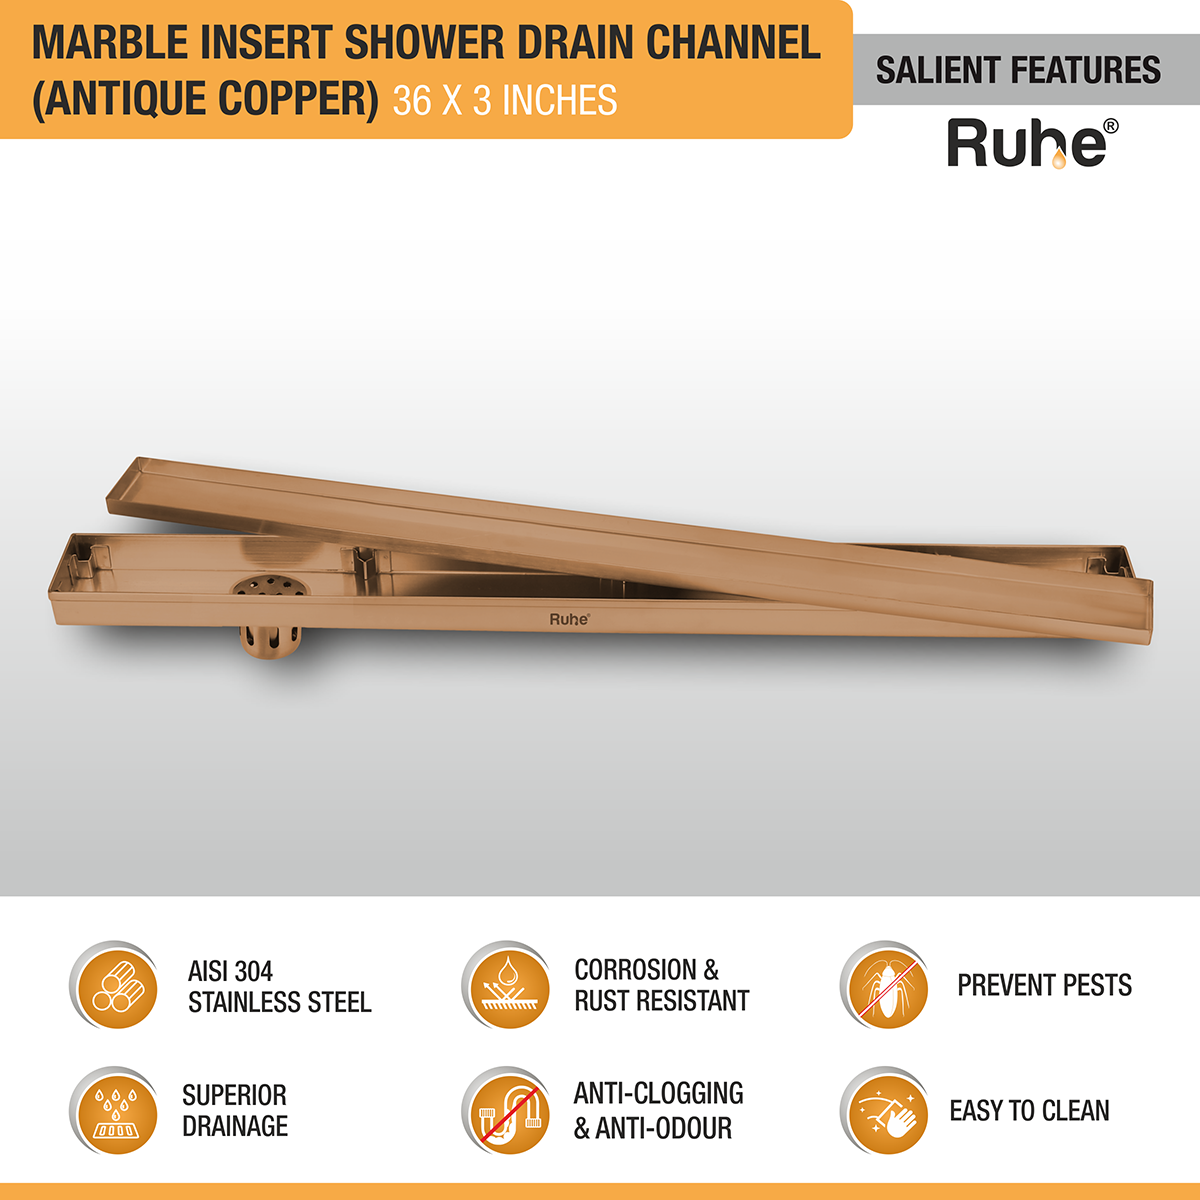 Marble Insert Shower Drain Channel (36 x 3 Inches) ROSE GOLD PVD Coated features and benefits